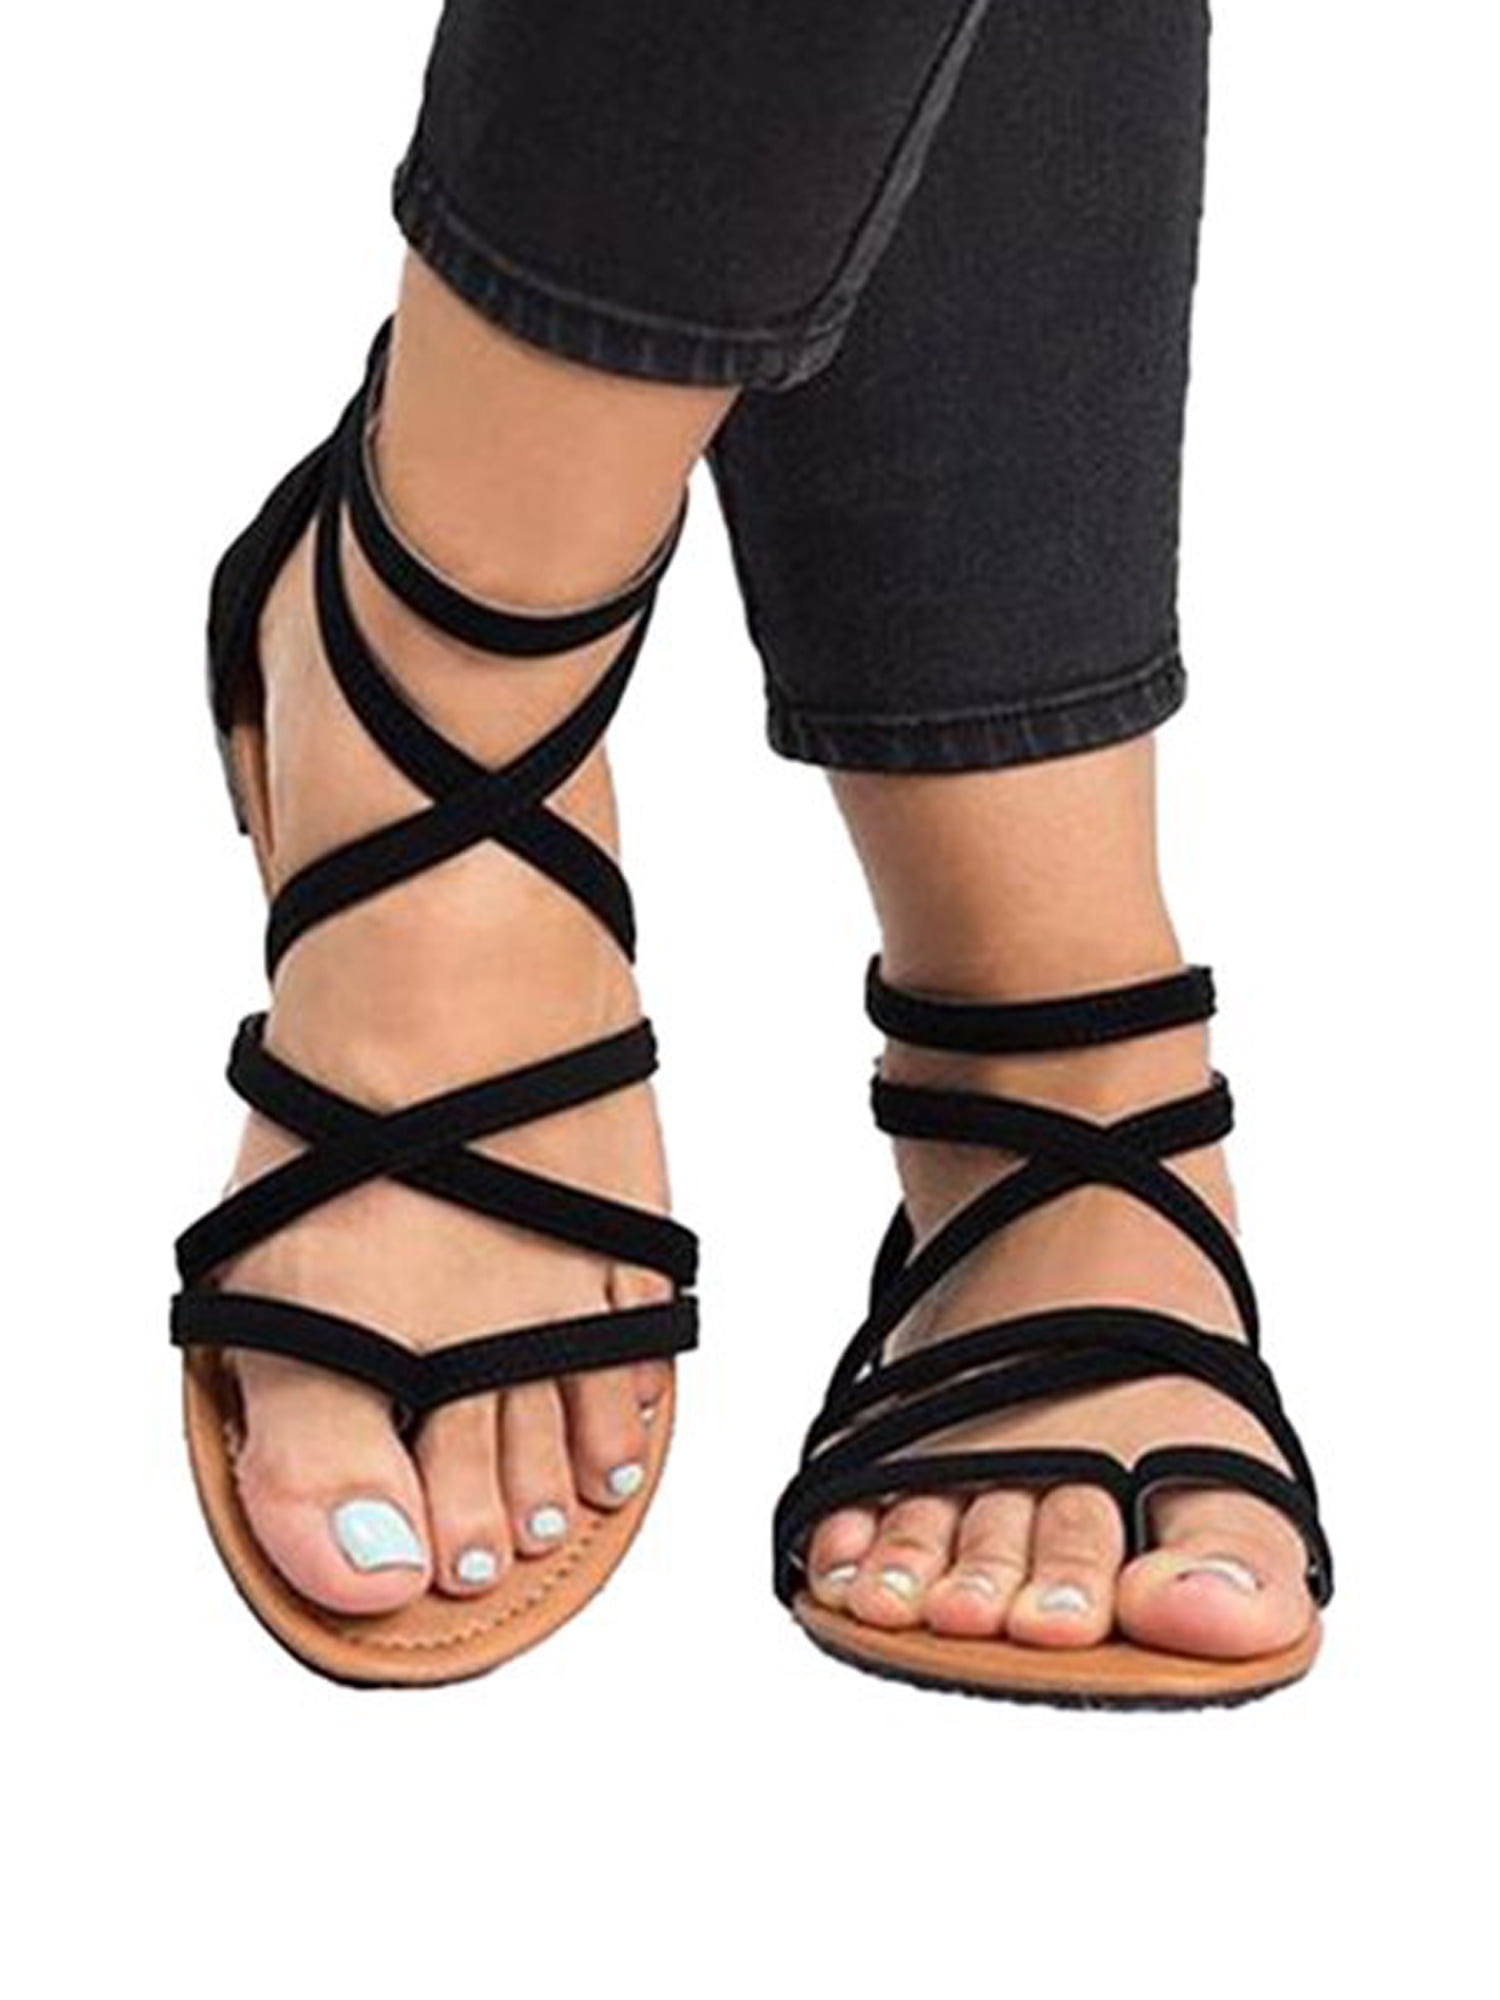 LADIES WOMENS SUMMER SANDAL HOLIDAY GLADIATOR CASUAL FASHION STYLE SHOES SIZE 